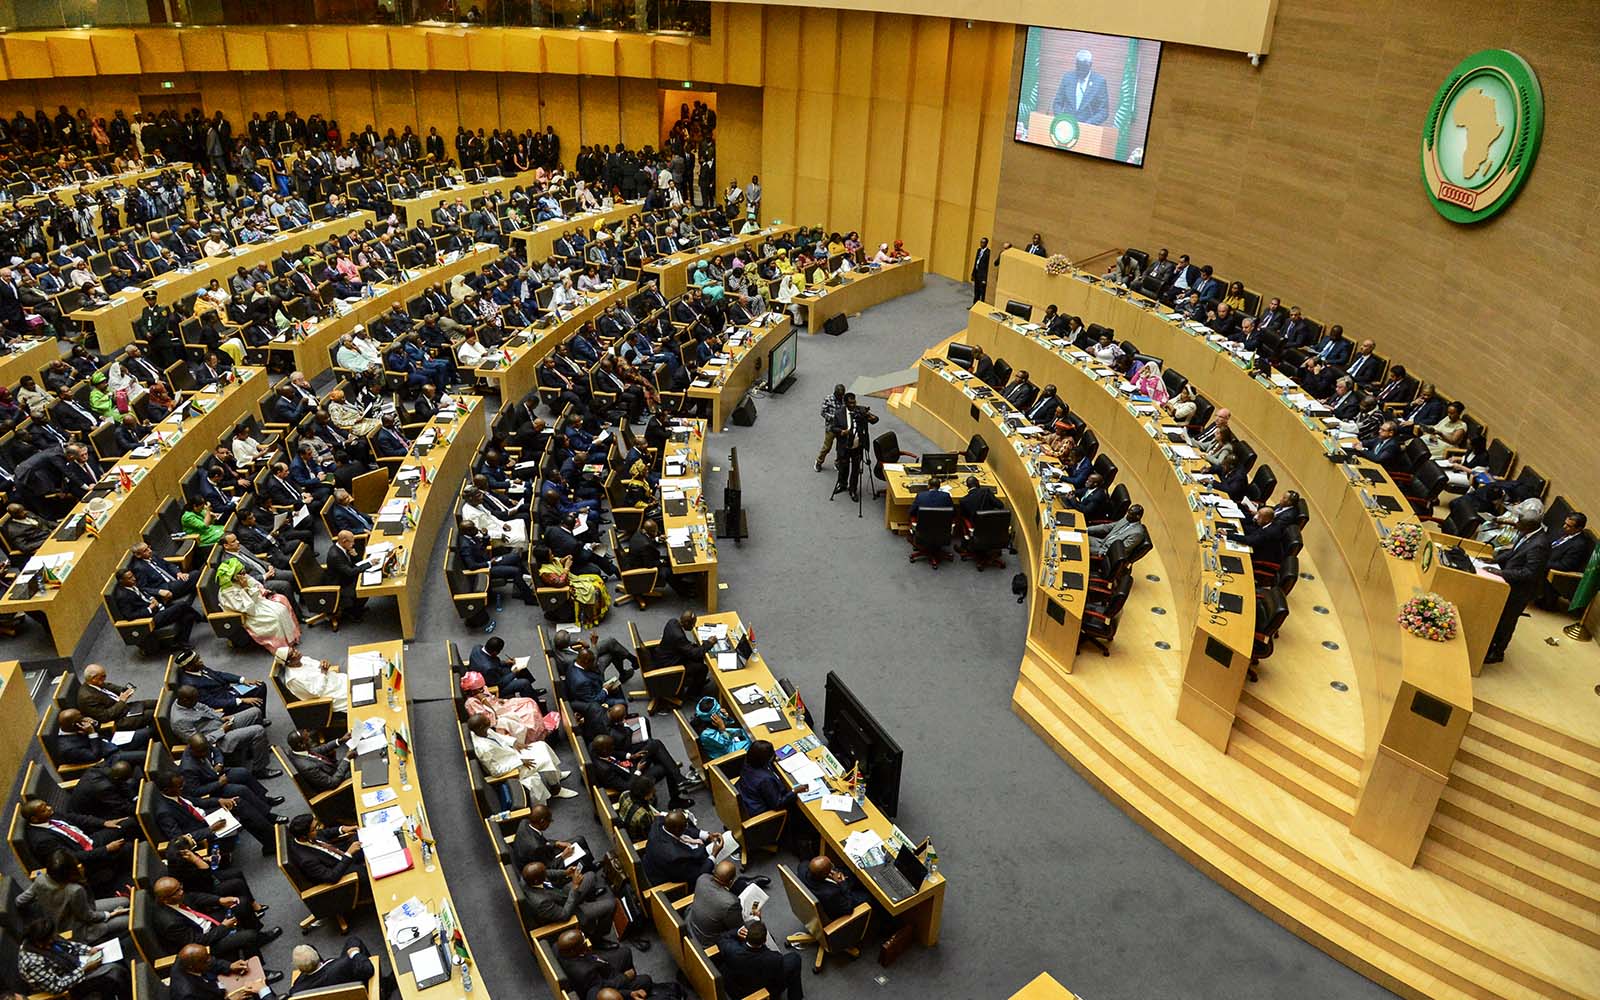 Delegates attend the opening session of the 33rd African Union Summit at its headquarters in Addis Ababa, Ethiopia, 9 Feb 2020. 